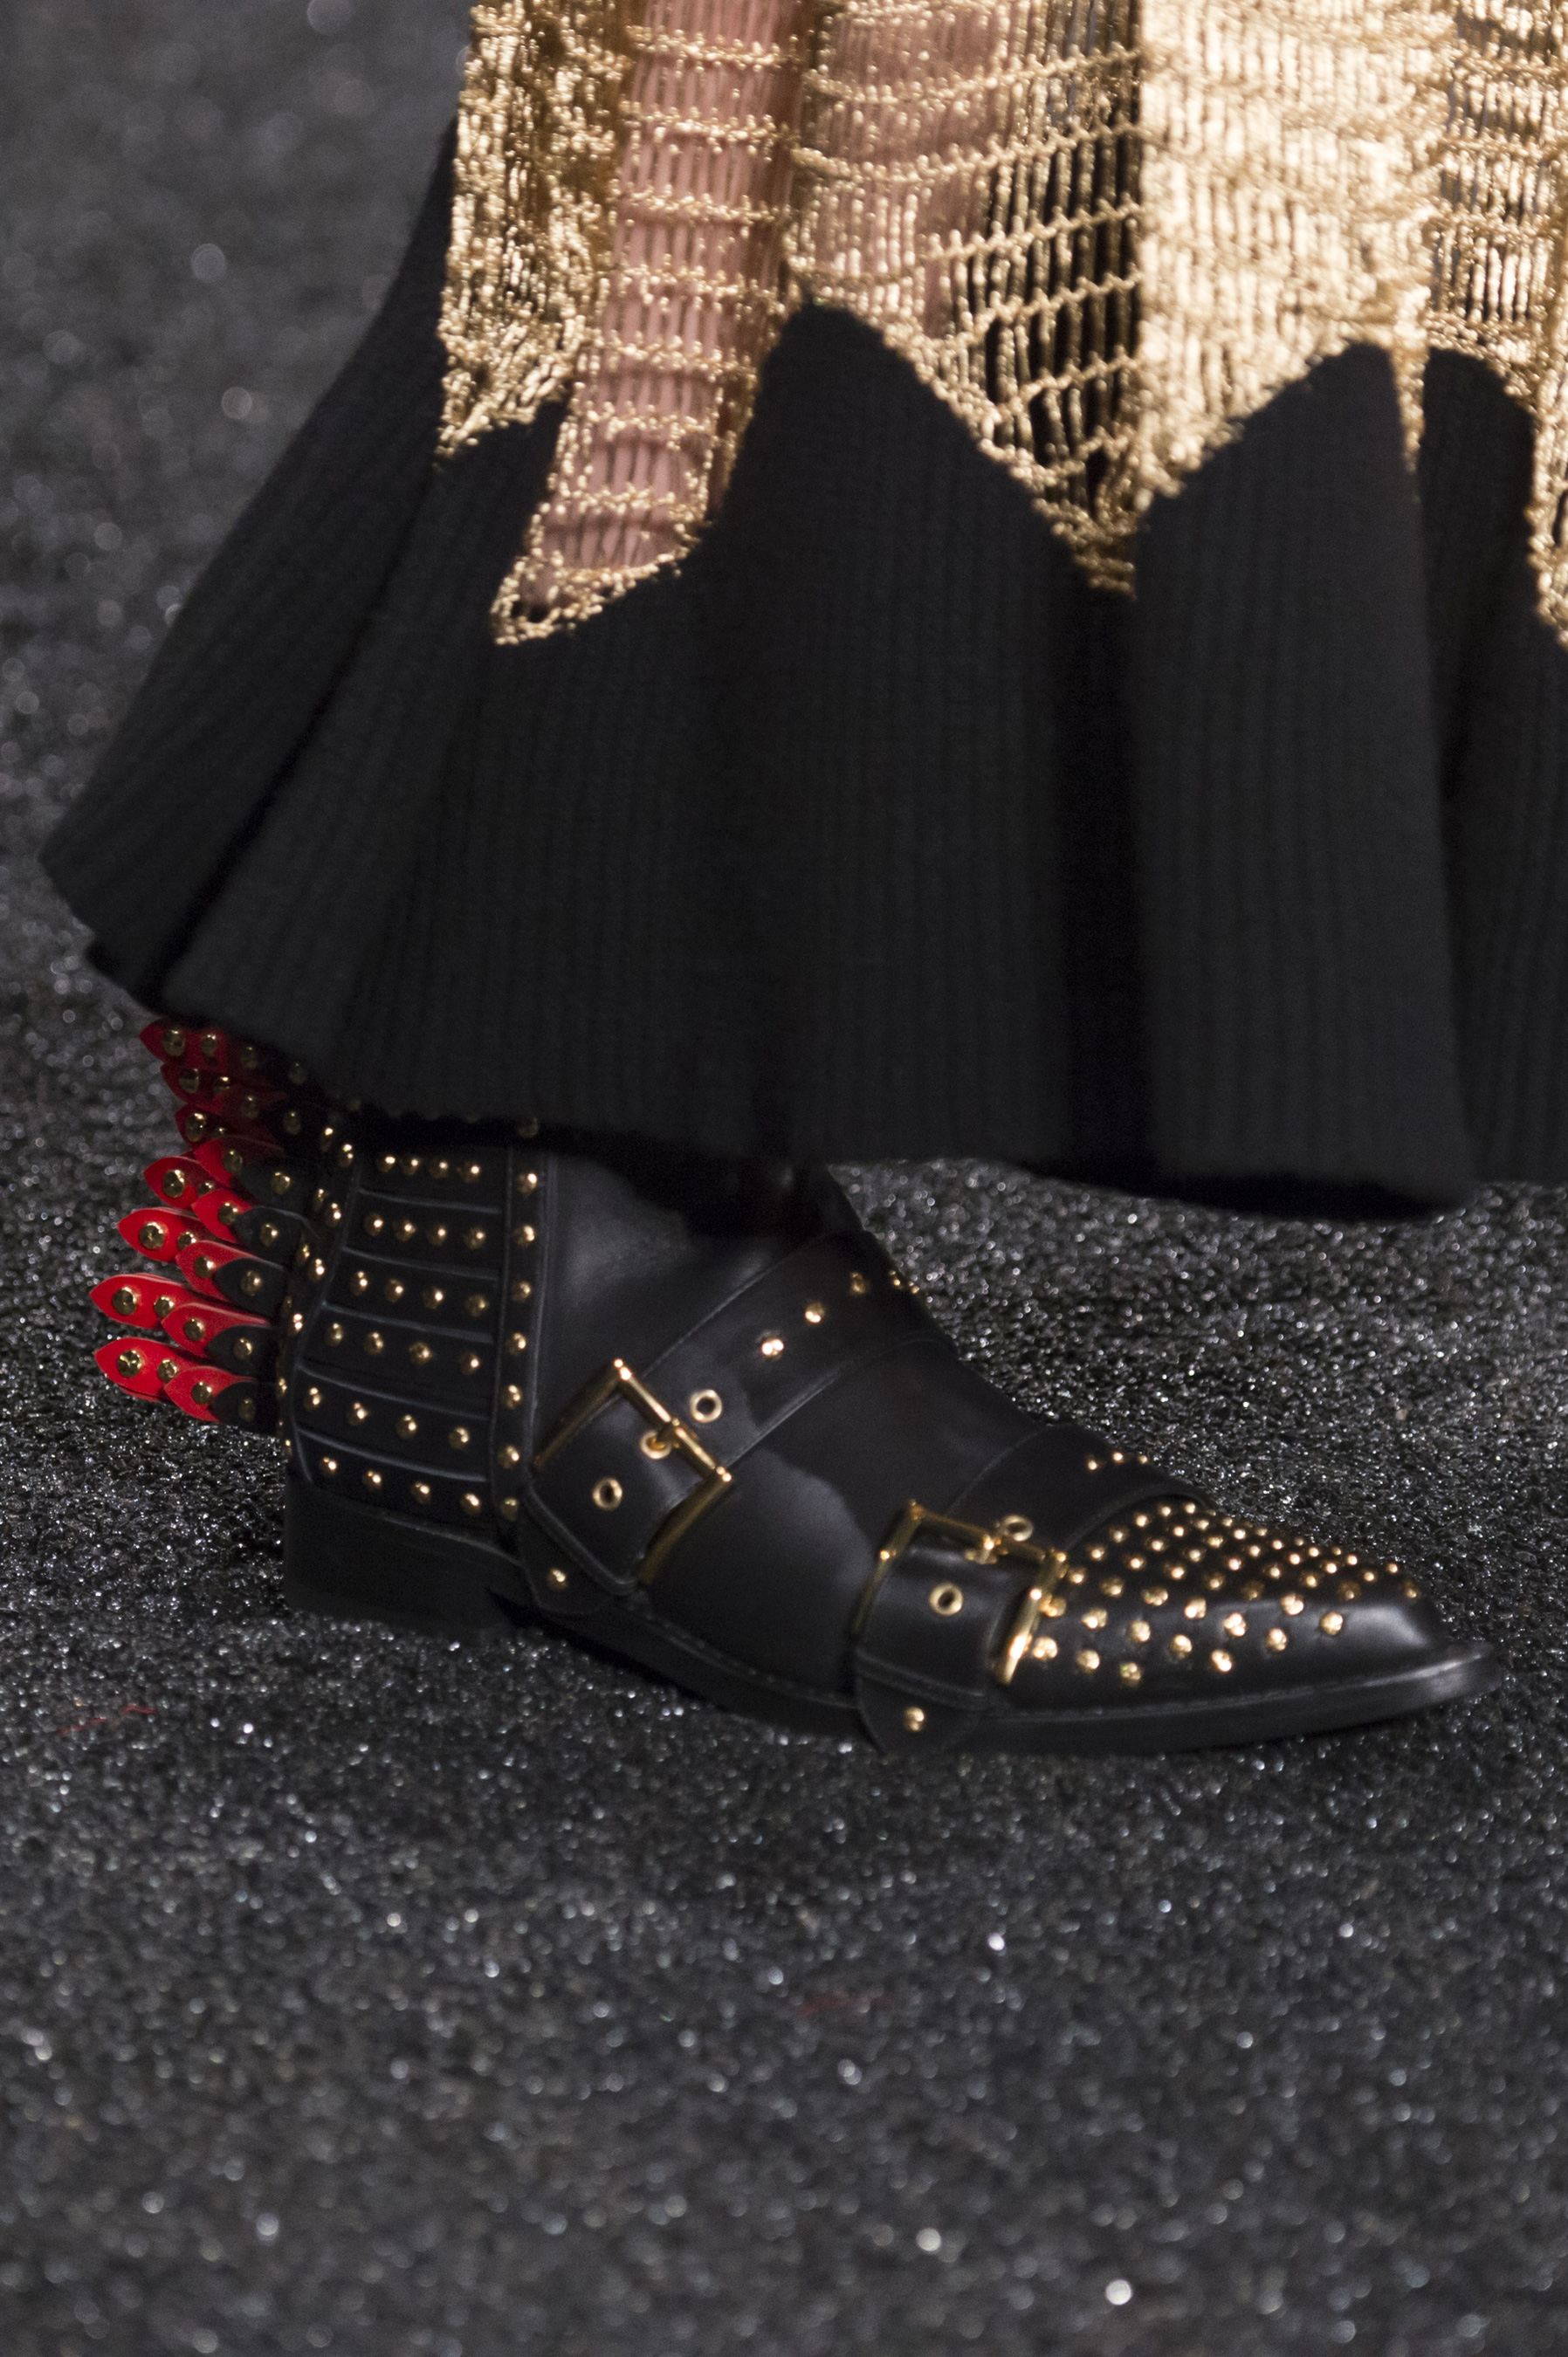 Alexander McQueen Fall 2017 Fashion Show Details - The Impression